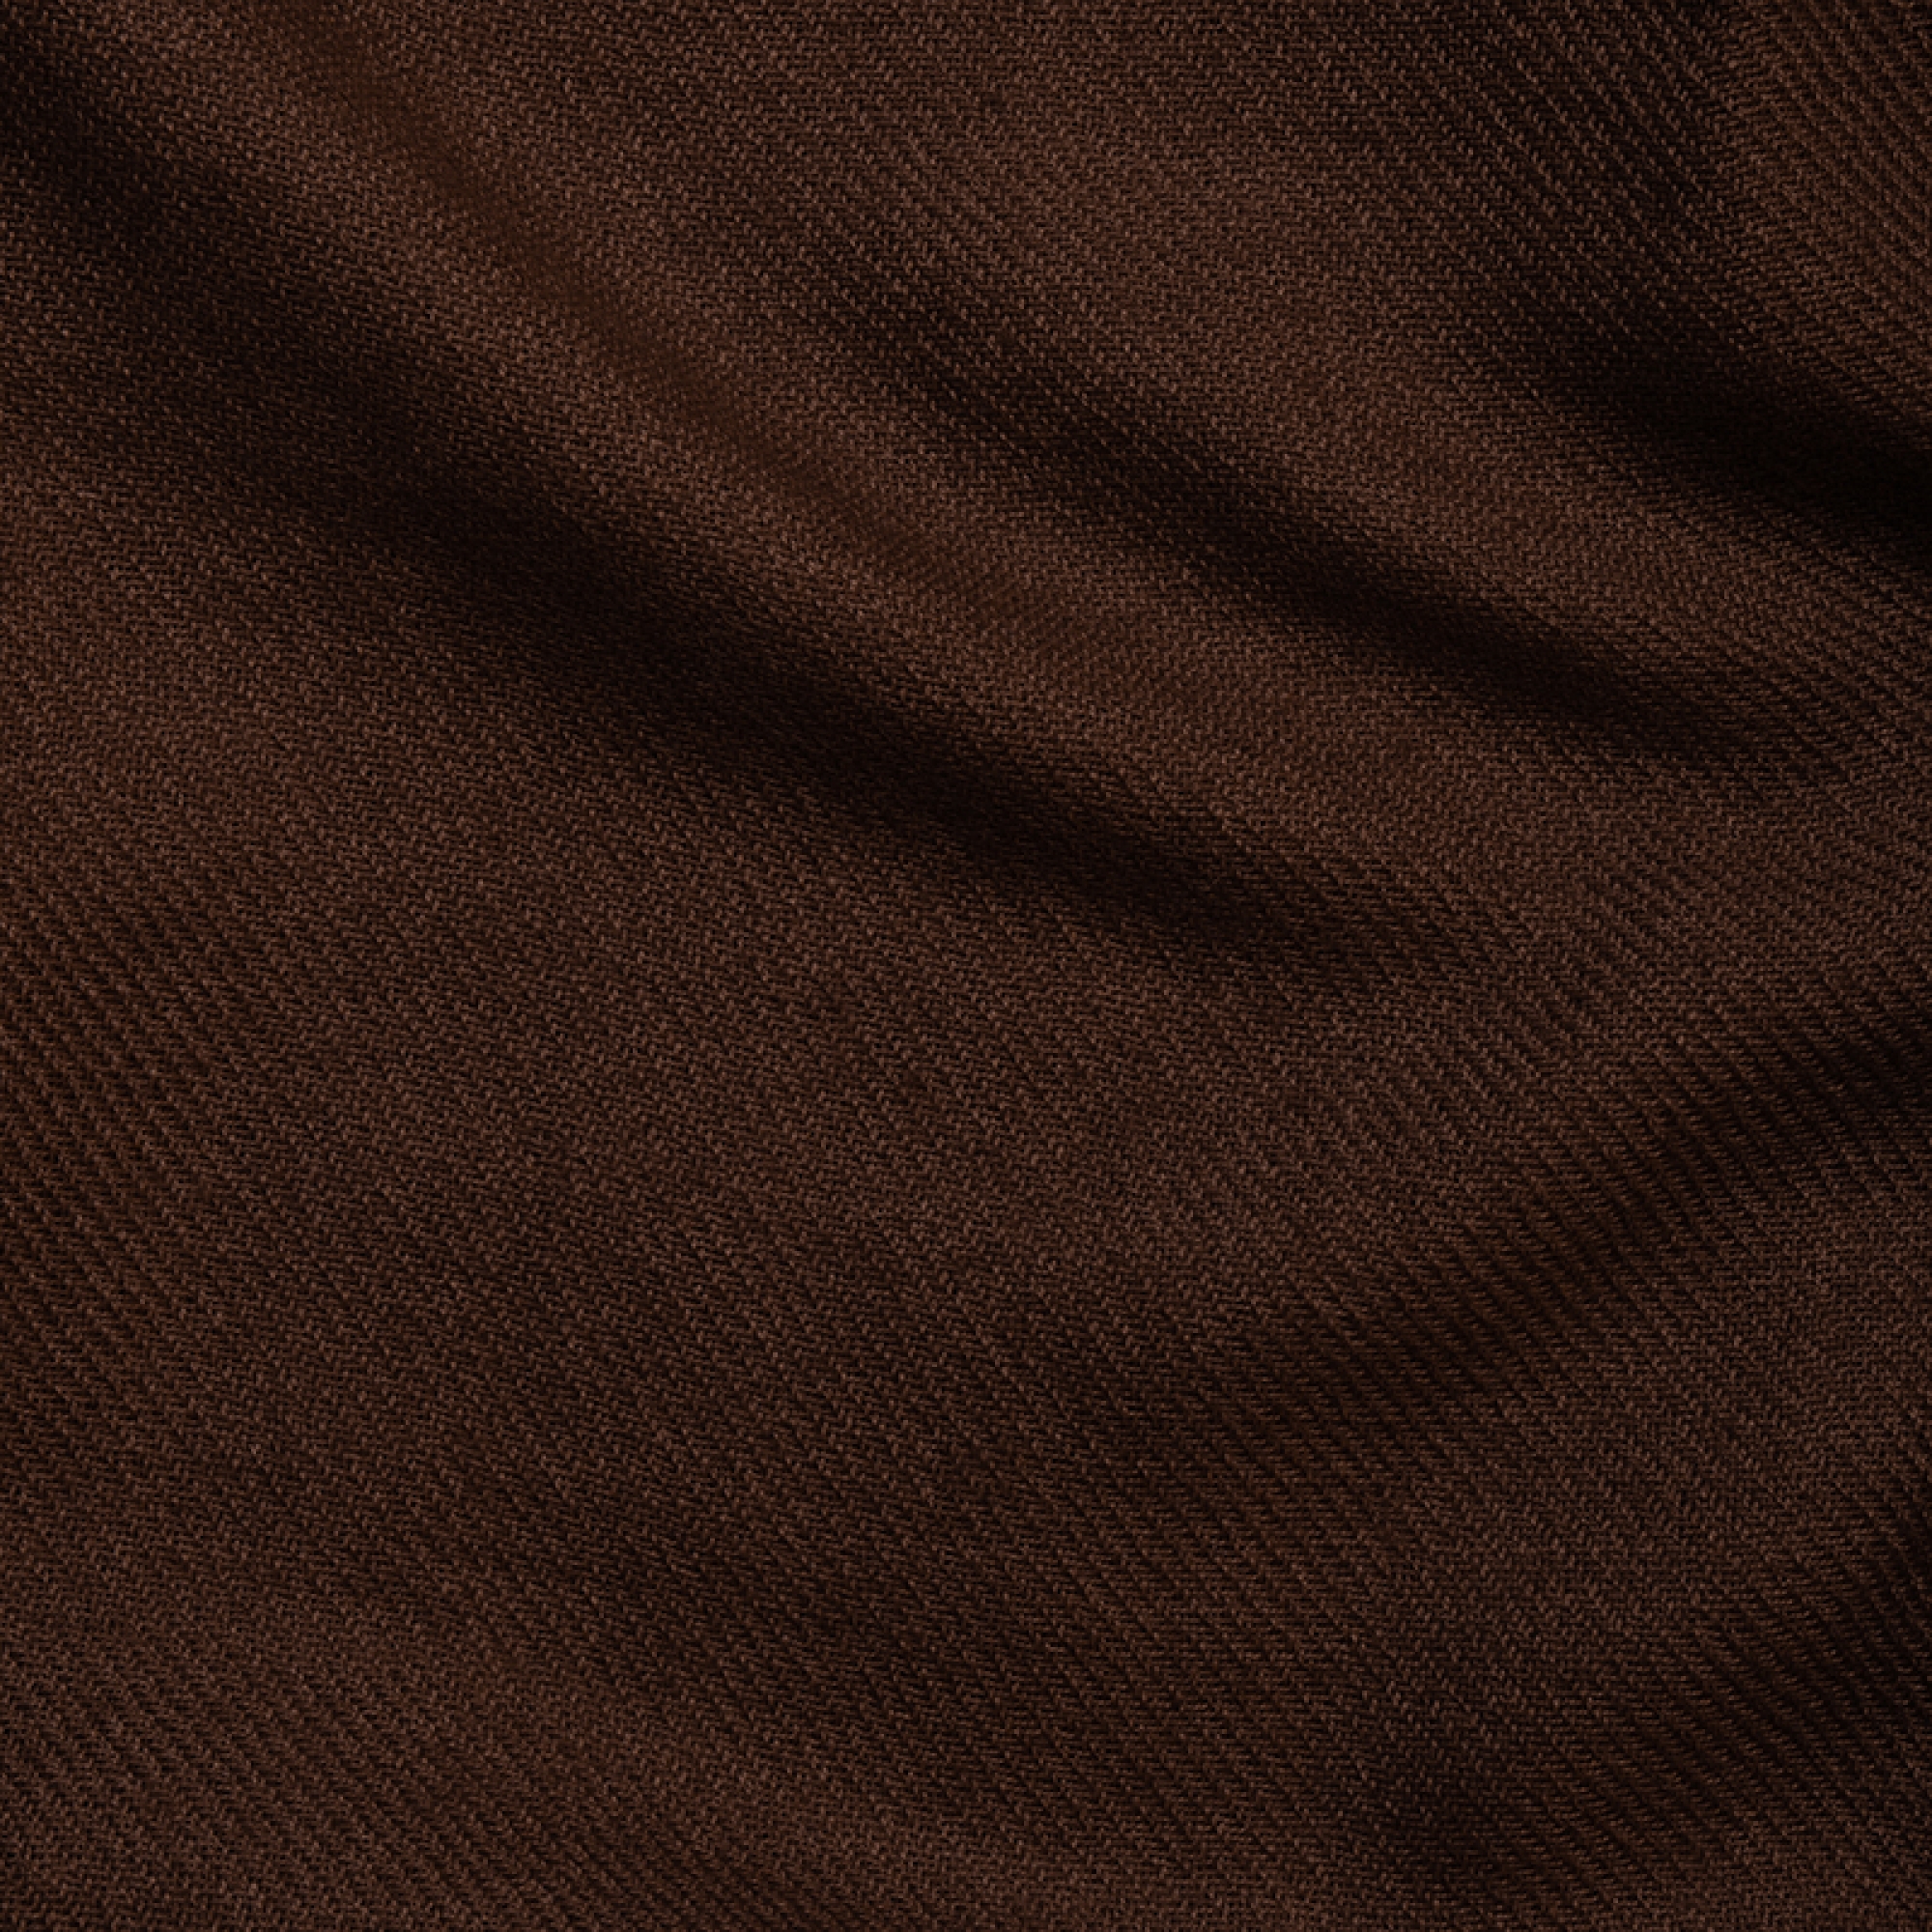 Cashmere accessories cocooning toodoo plain l 220 x 220 cacao 220x220cm